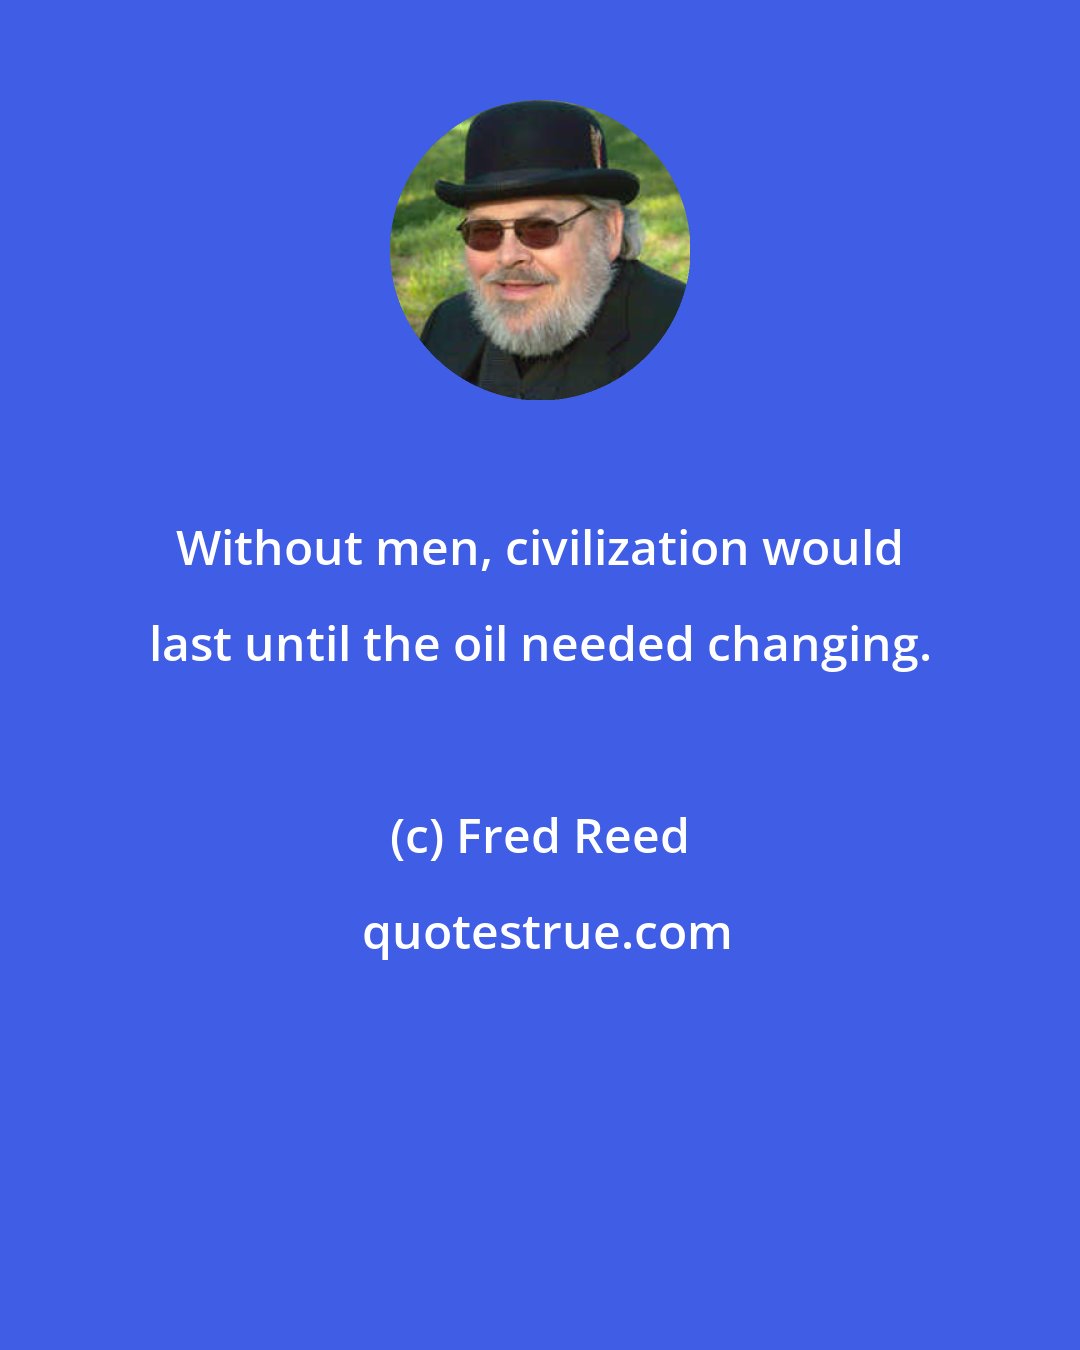 Fred Reed: Without men, civilization would last until the oil needed changing.